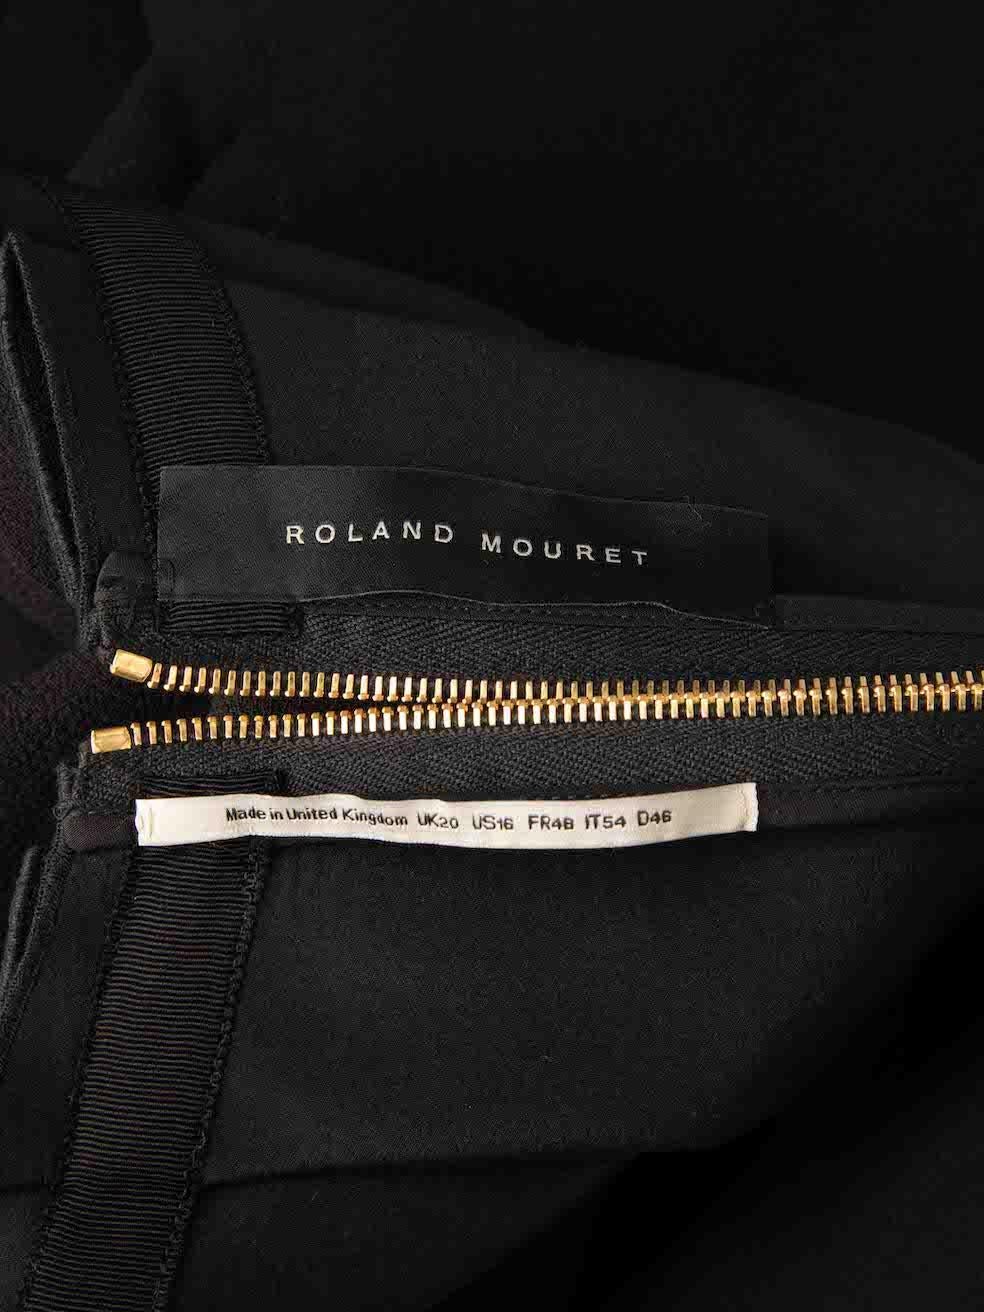 Roland Mouret Black Wool Gathered Zipped Skirt Size 4XL For Sale 1